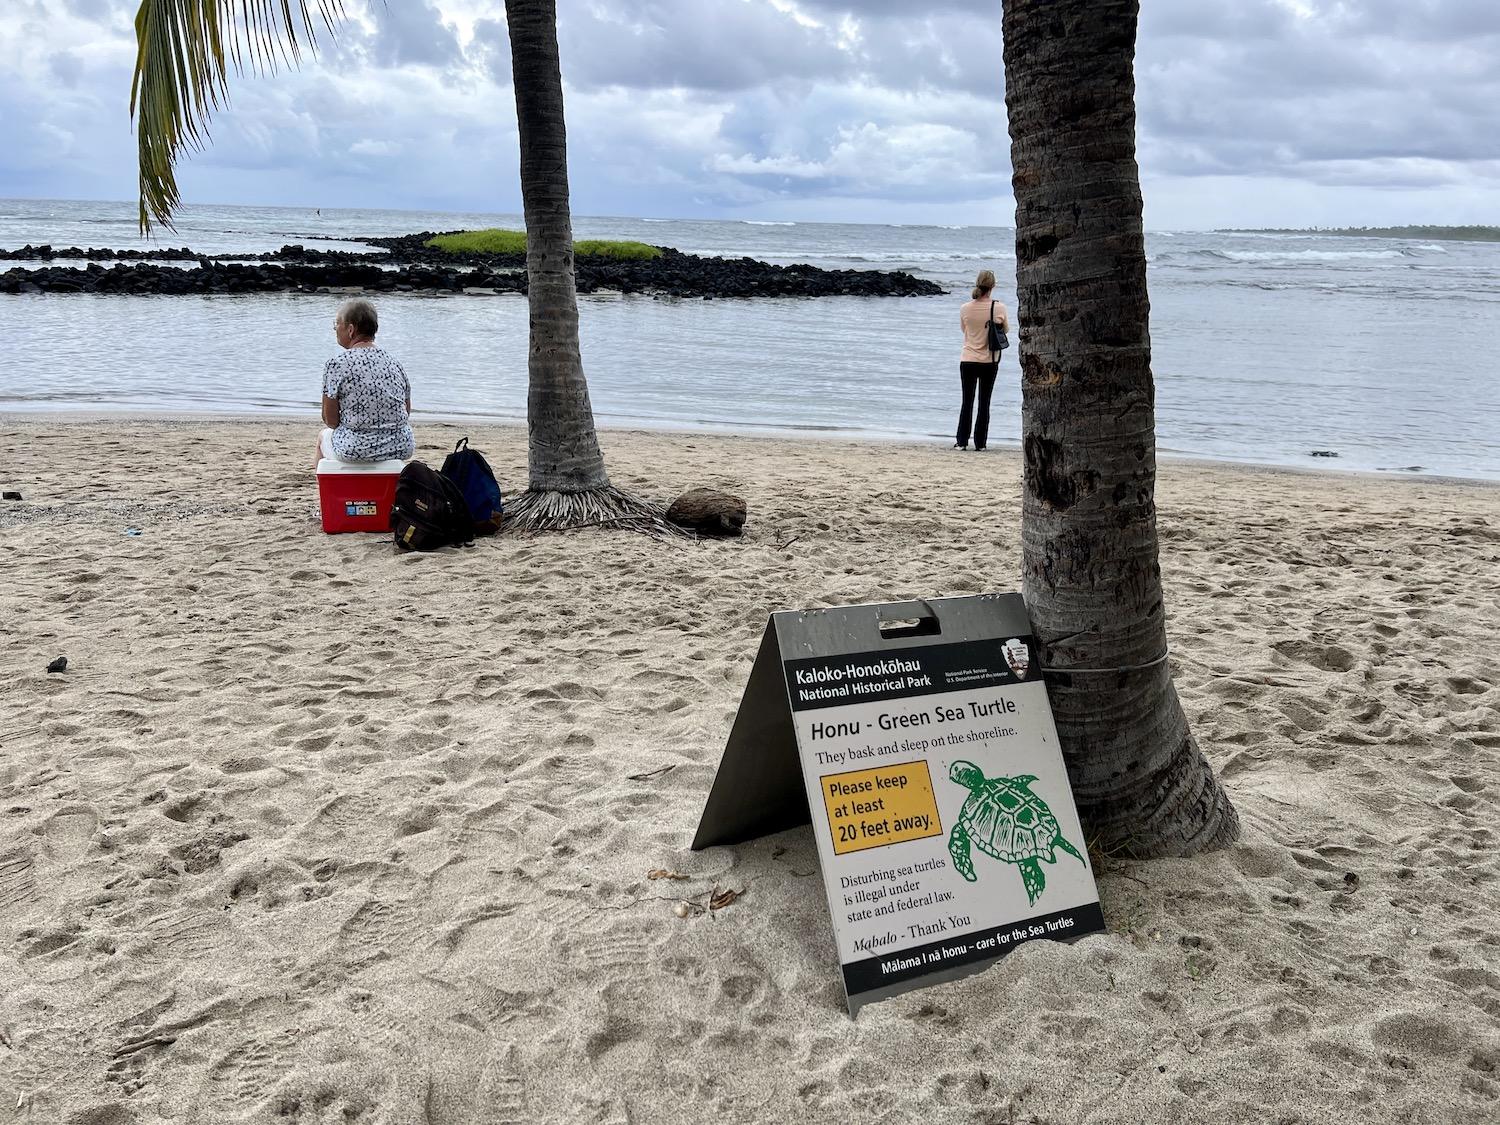 On Honokōhau Beach, park visitors watch for marine life by a sign about keeping 20 feet from green sea turtles.